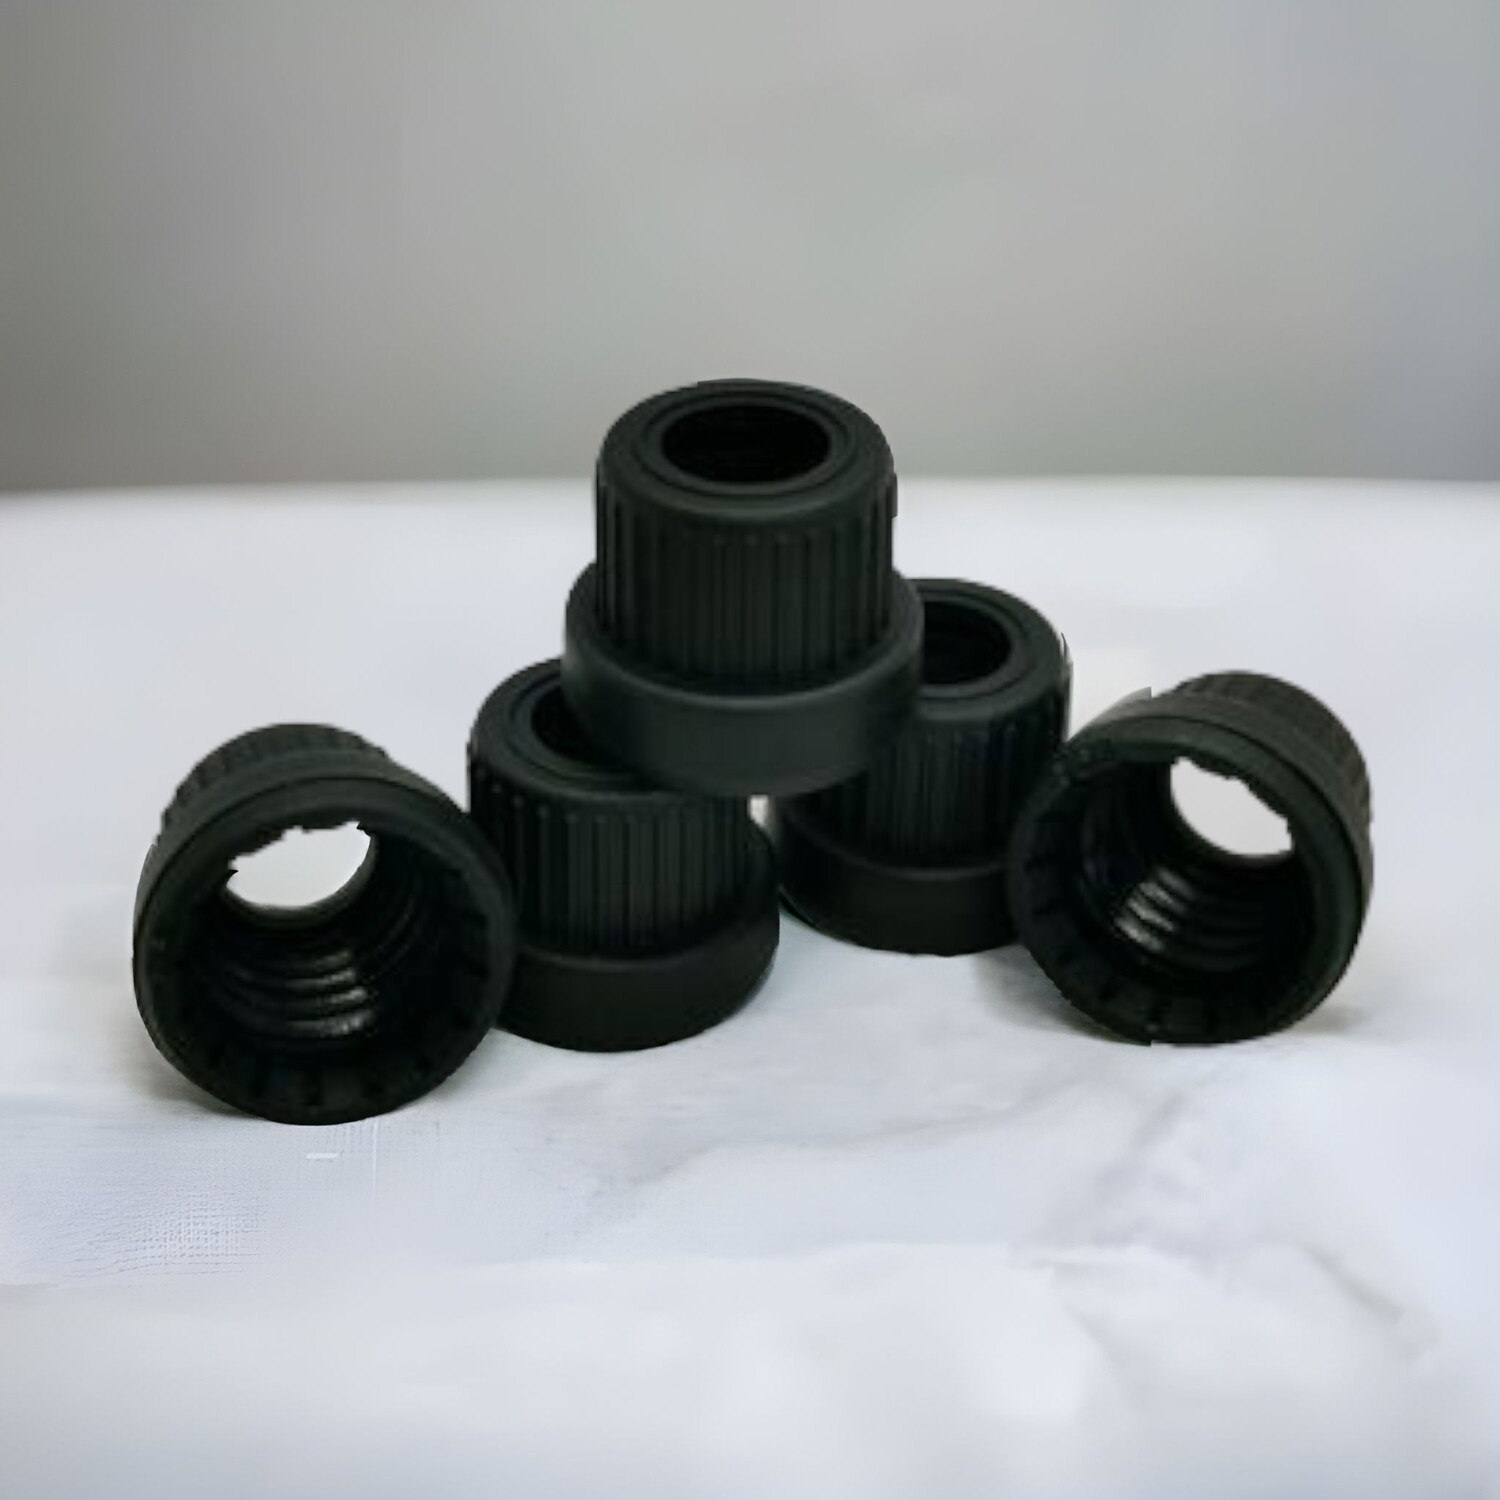 18mm Black TAMPER Evident Caps (EURO STYLE) for Droppers (Cap Only) - BULK 100pcs